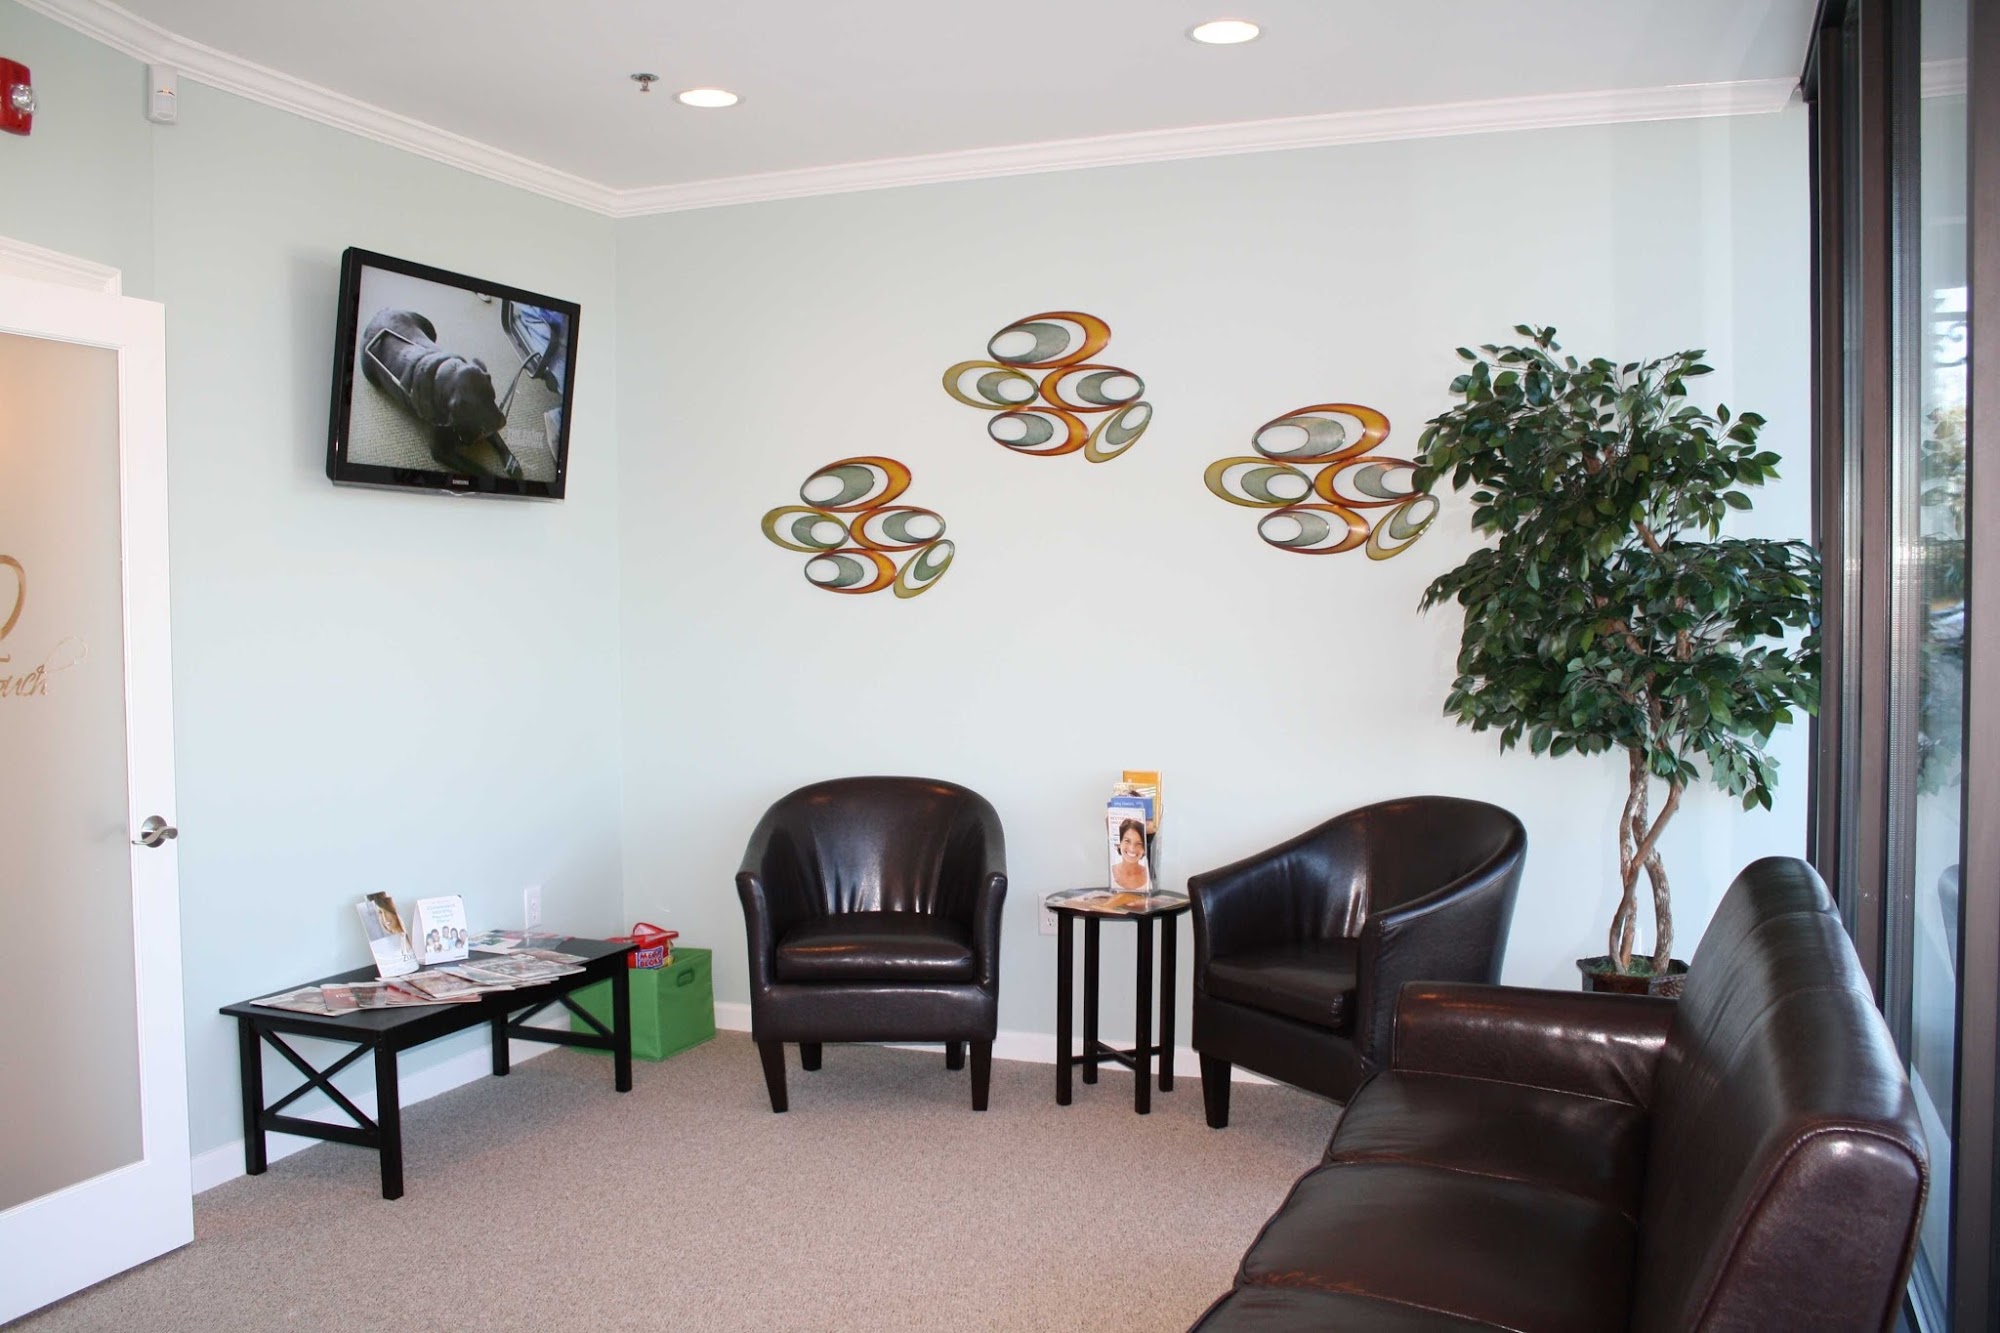 Caring Touch Family Dentistry